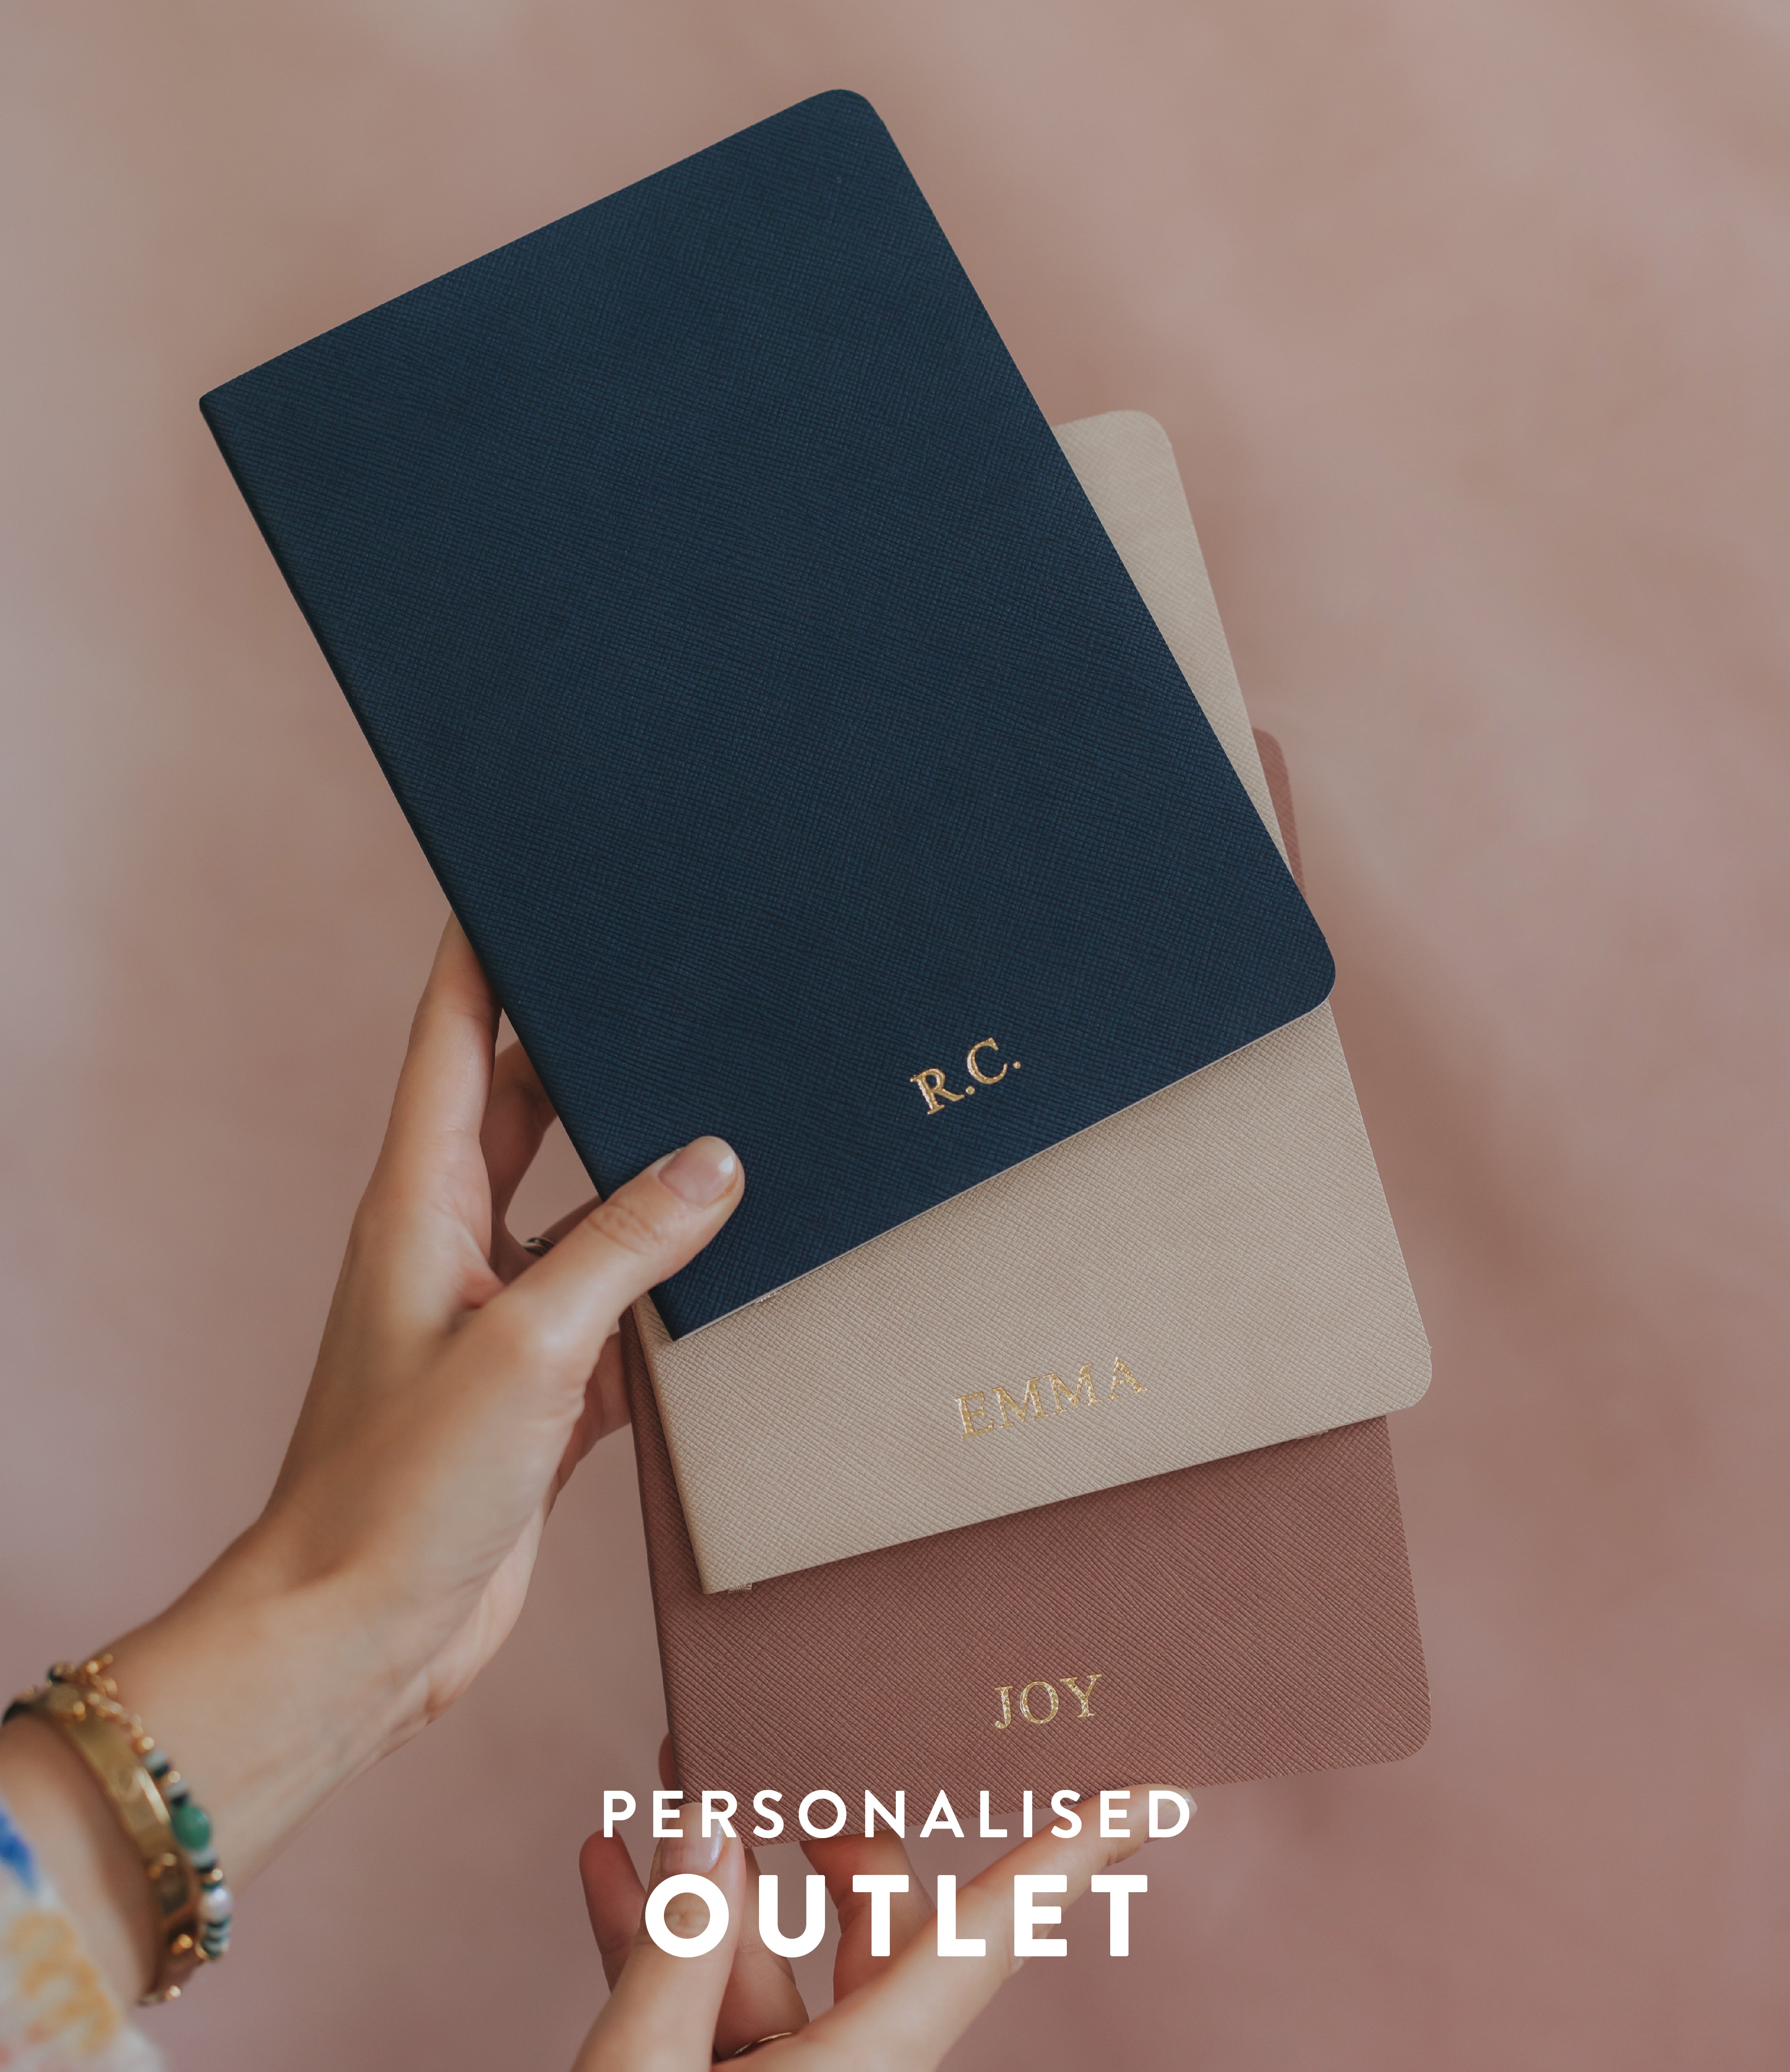 (Personalised Outlet) Classic Notebook